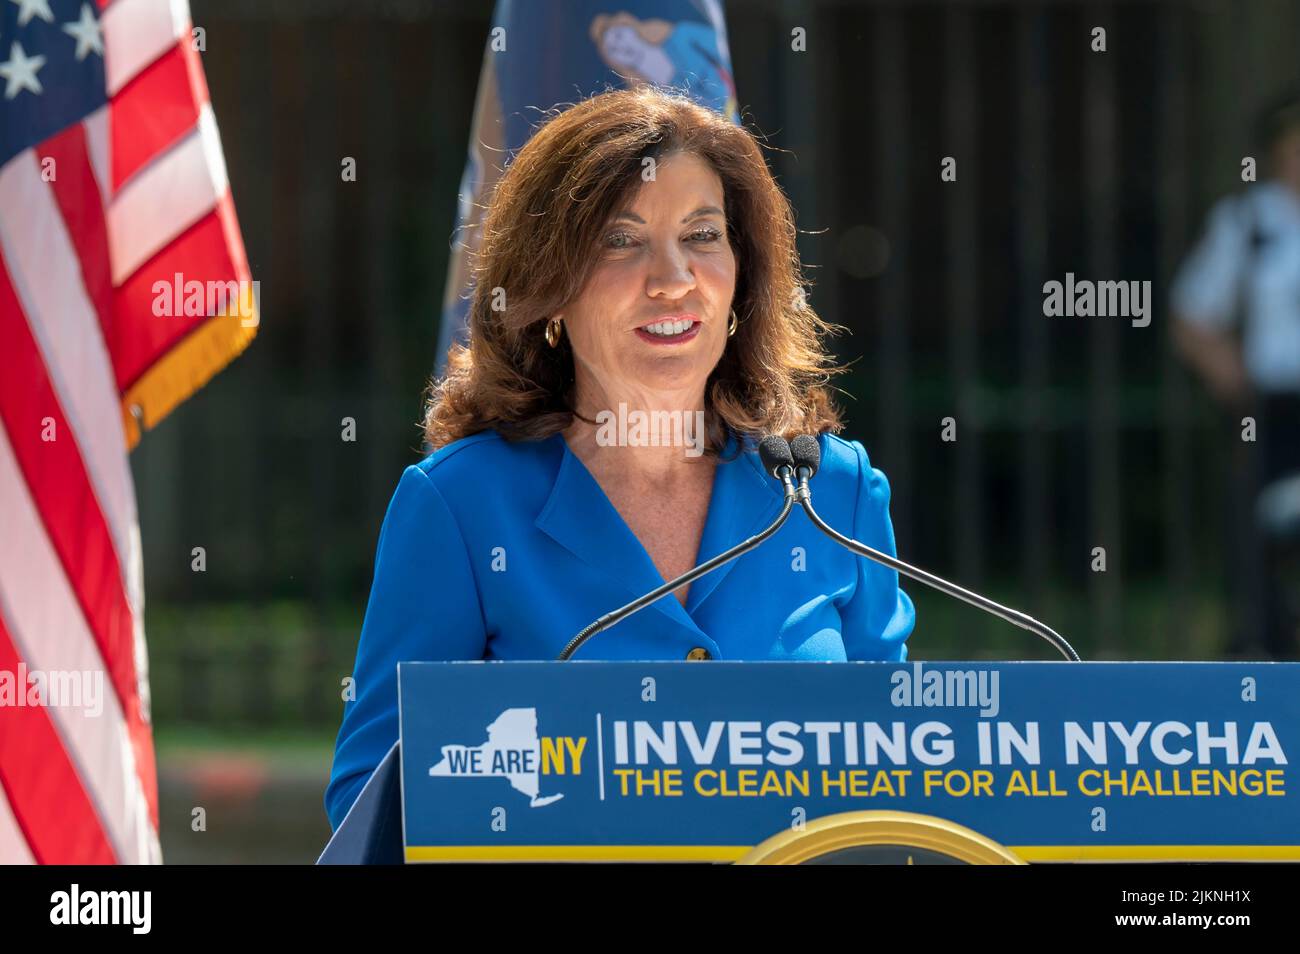 Governor Kathy Hochul speaks during a joint housing and clean energy-related announcement at Woodside Houses NYCHA complex in Queens Borough of New York City. Governor Hochul and Mayor Adams announce $70 million initial investment to decarbonize NYCHA buildings as part of clean heat for all challenge. The plan calls for the installation of what's called an 'electric heat pump', developed by NYPA selected Midea America and Gradient, in 30,000 units, which would provide tenants in each apartment with the ability to control the heat or keep their units cool throughout the year. Stock Photo